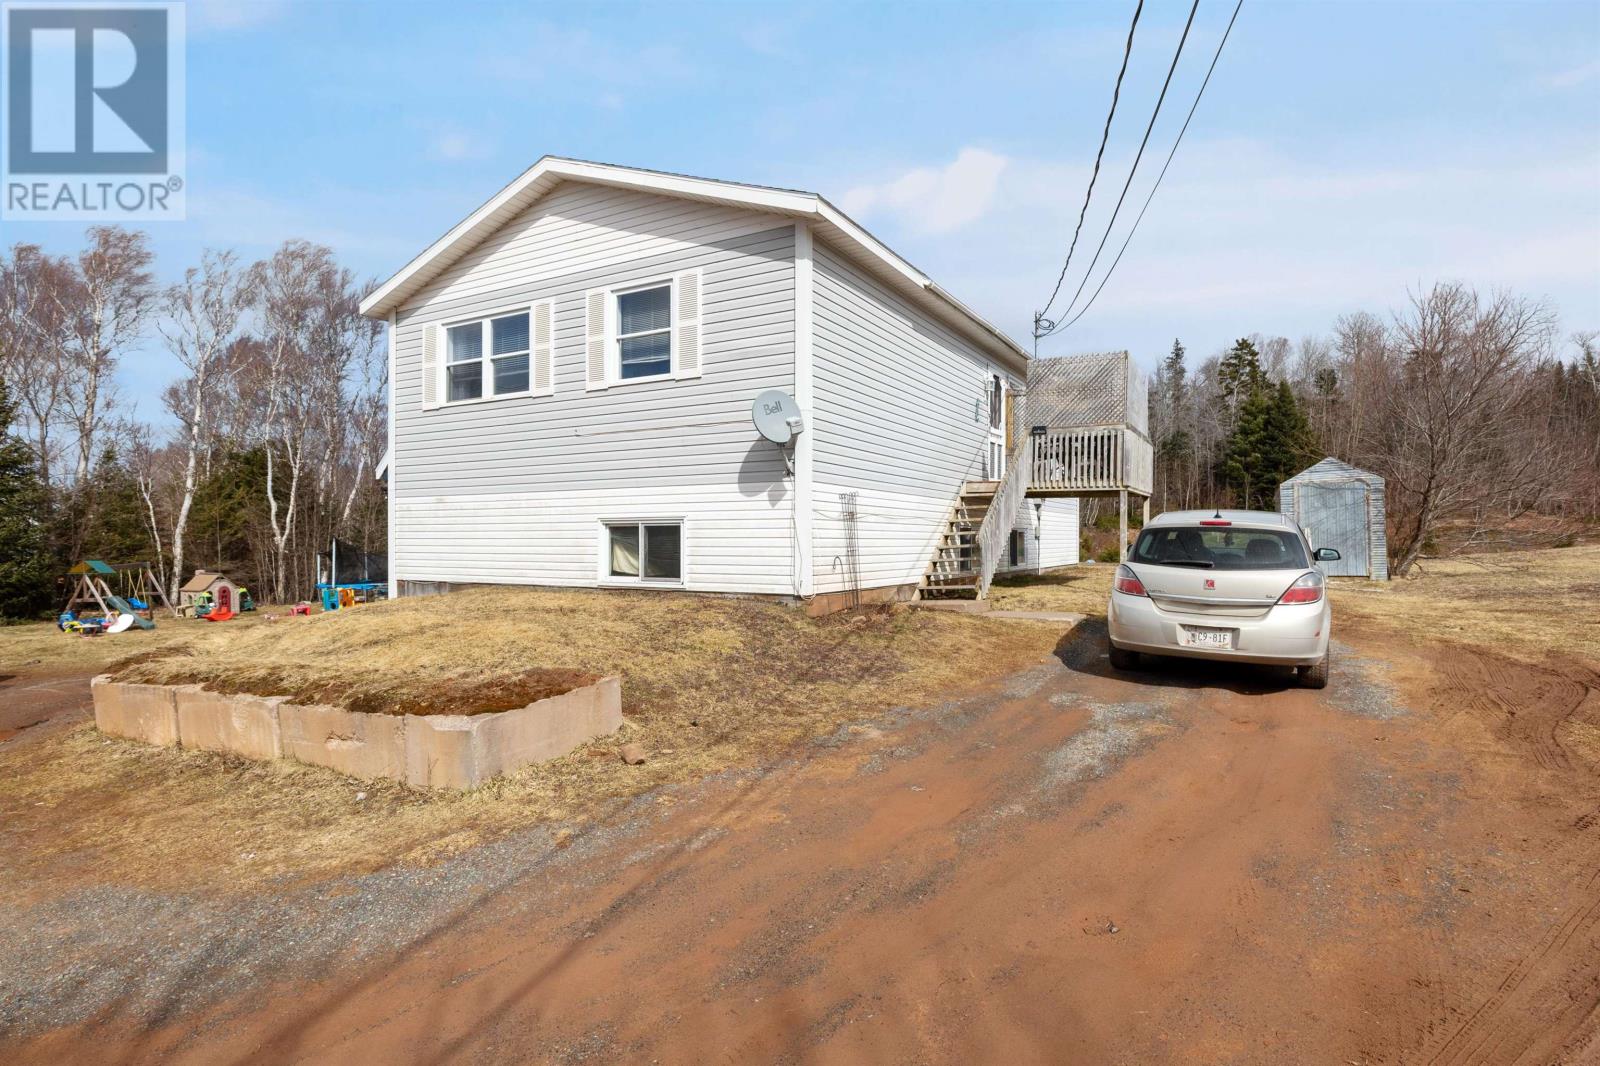 5819/5821 Campbell Road|Victoria Cross, montague, Prince Edward Island